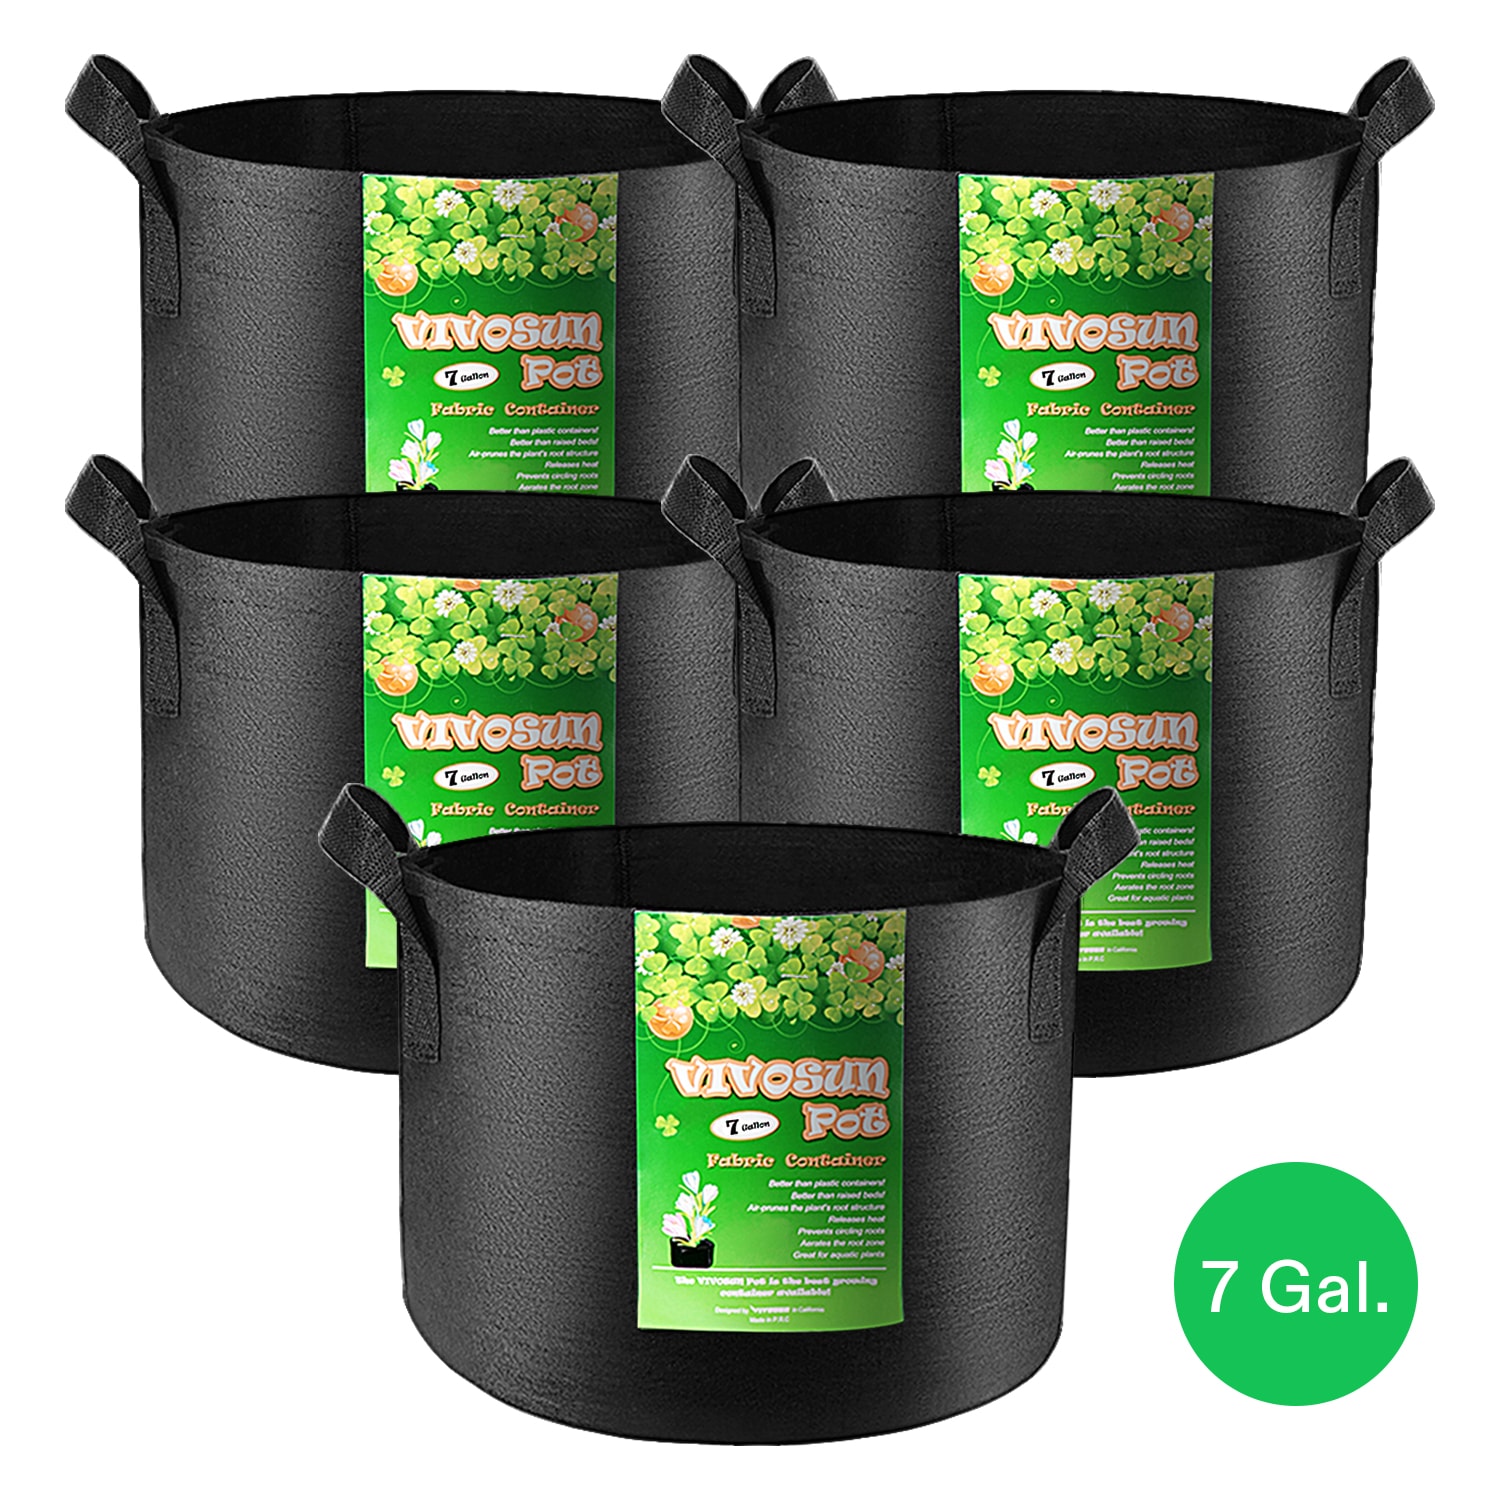 HAOWIN 7-Pack Colorful Plant Grow Bags, Thickest Fabric Pots 10 Gallon 7  Gallon 5 Gallon 3 Gallon Variety Size Pack, Plant Labels Included Potato